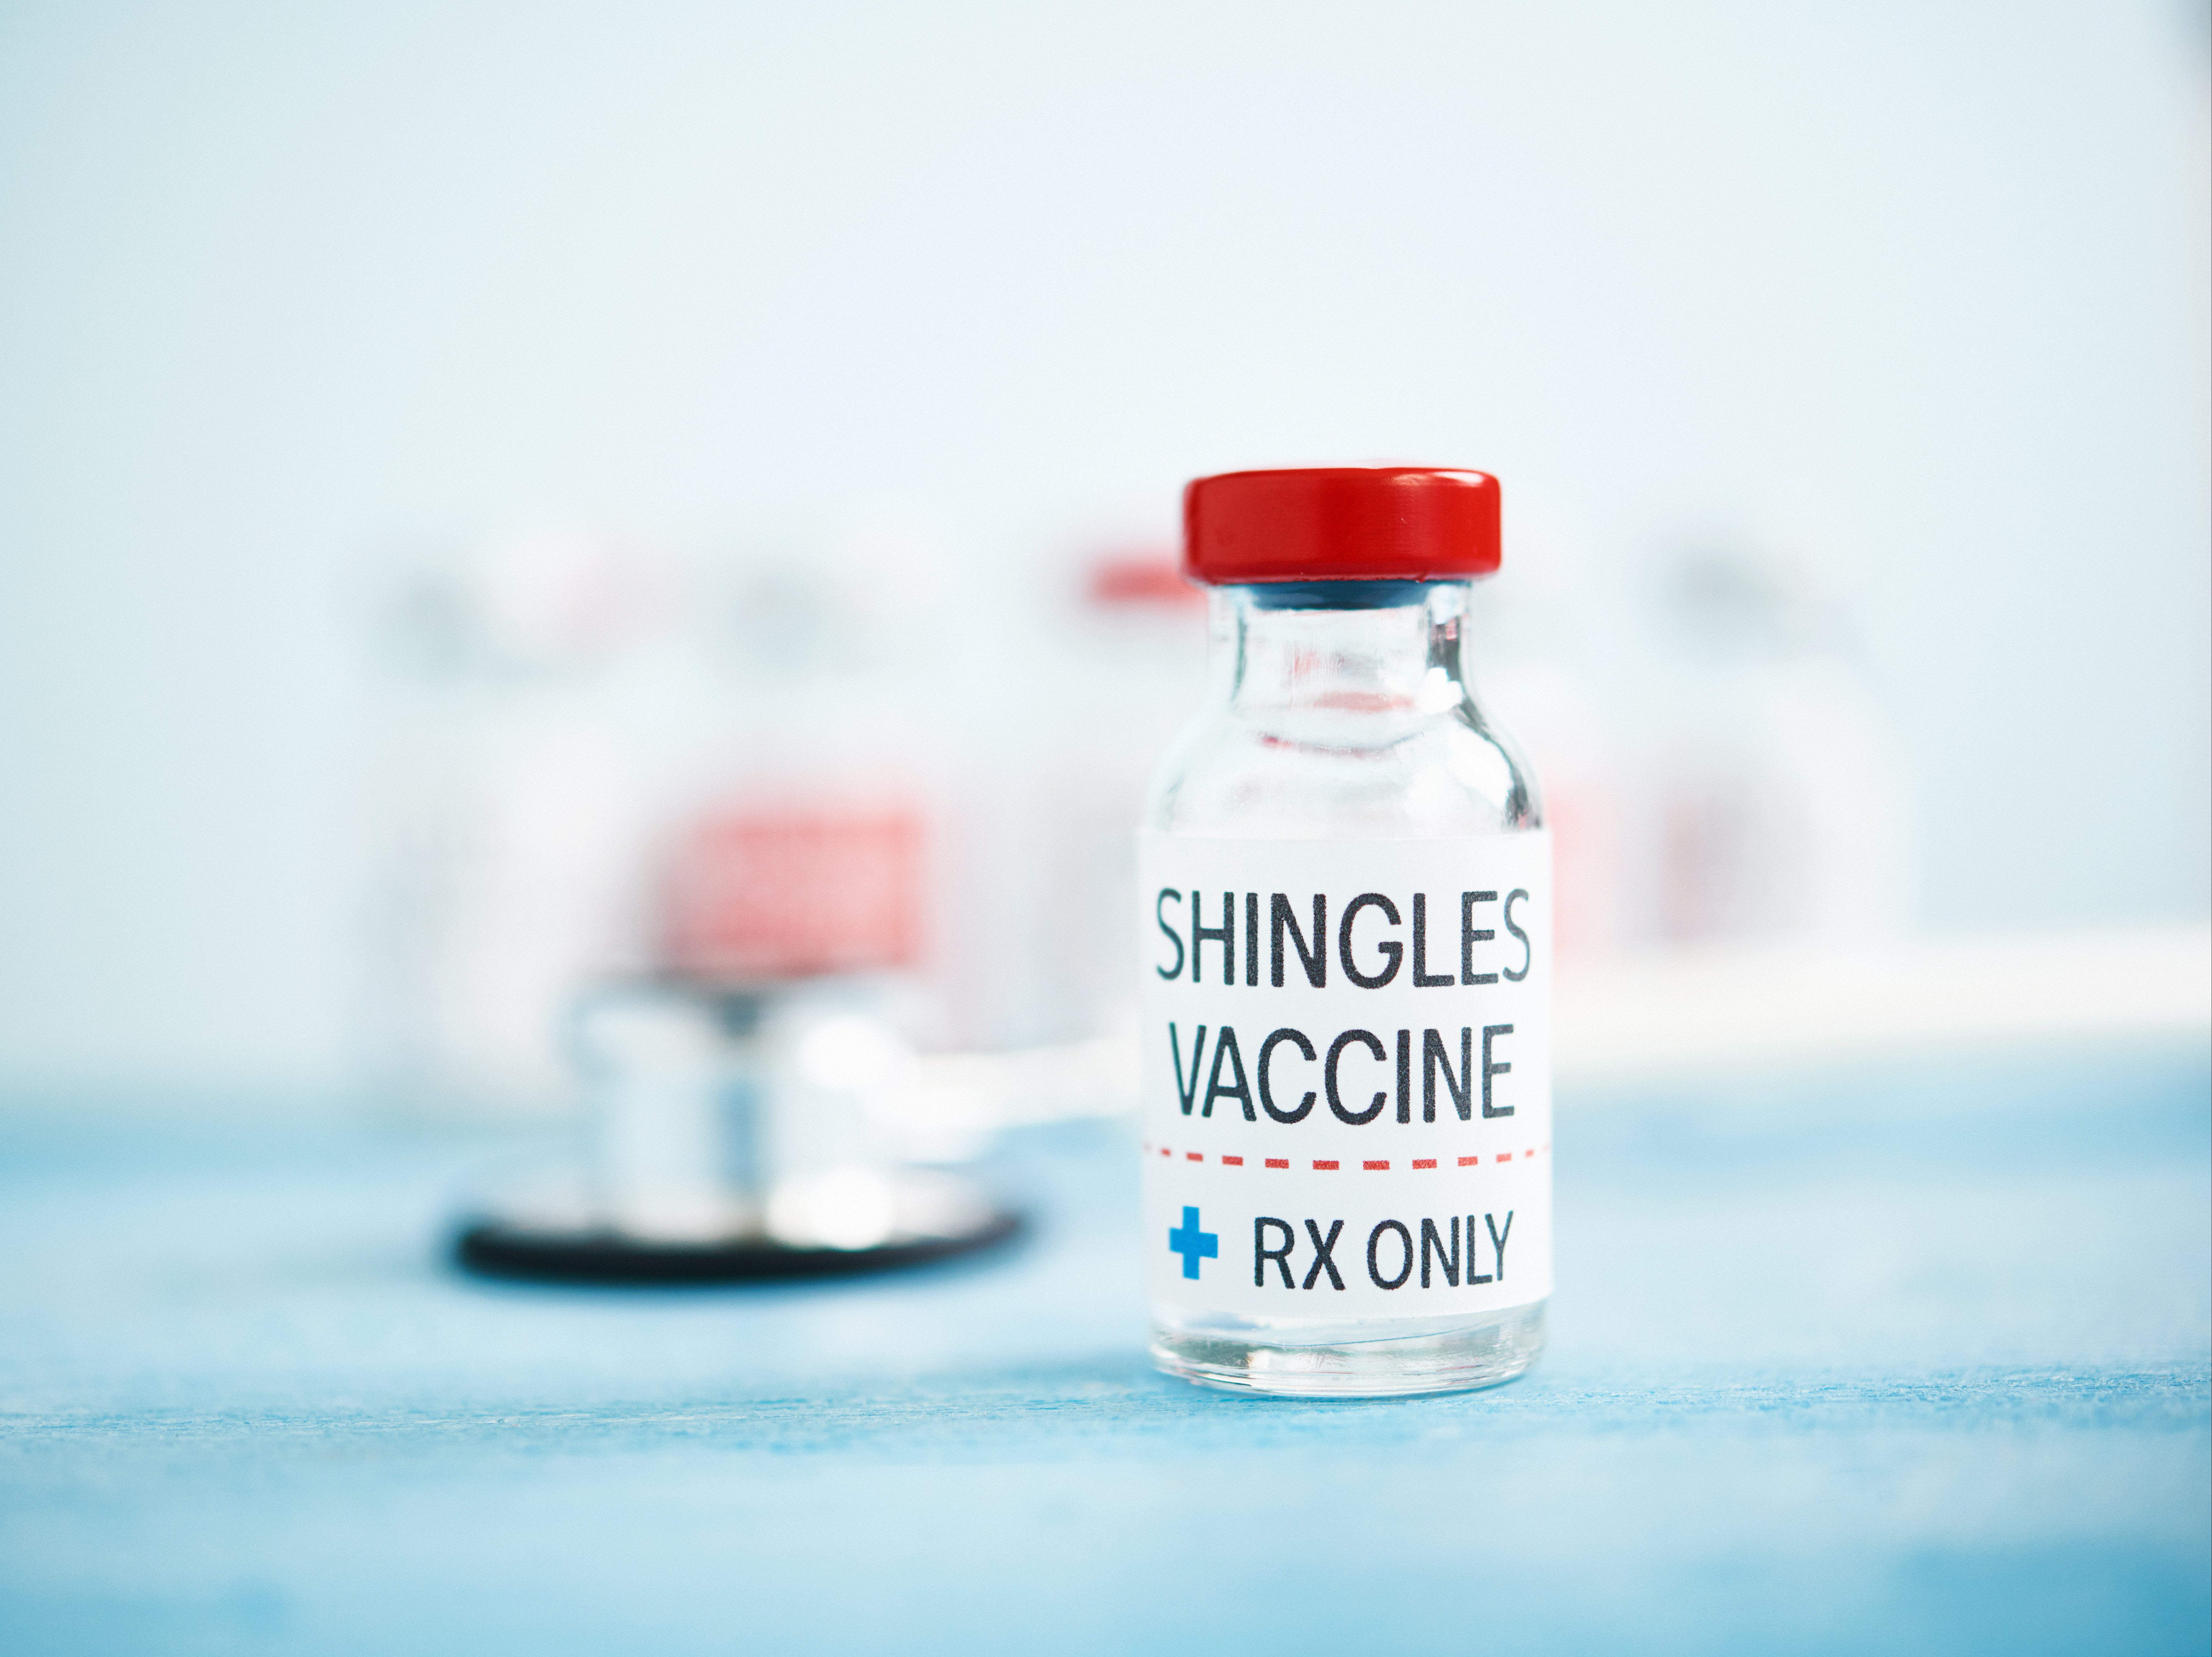 The shingles vaccine is available on the NHS but only to people in their 70s